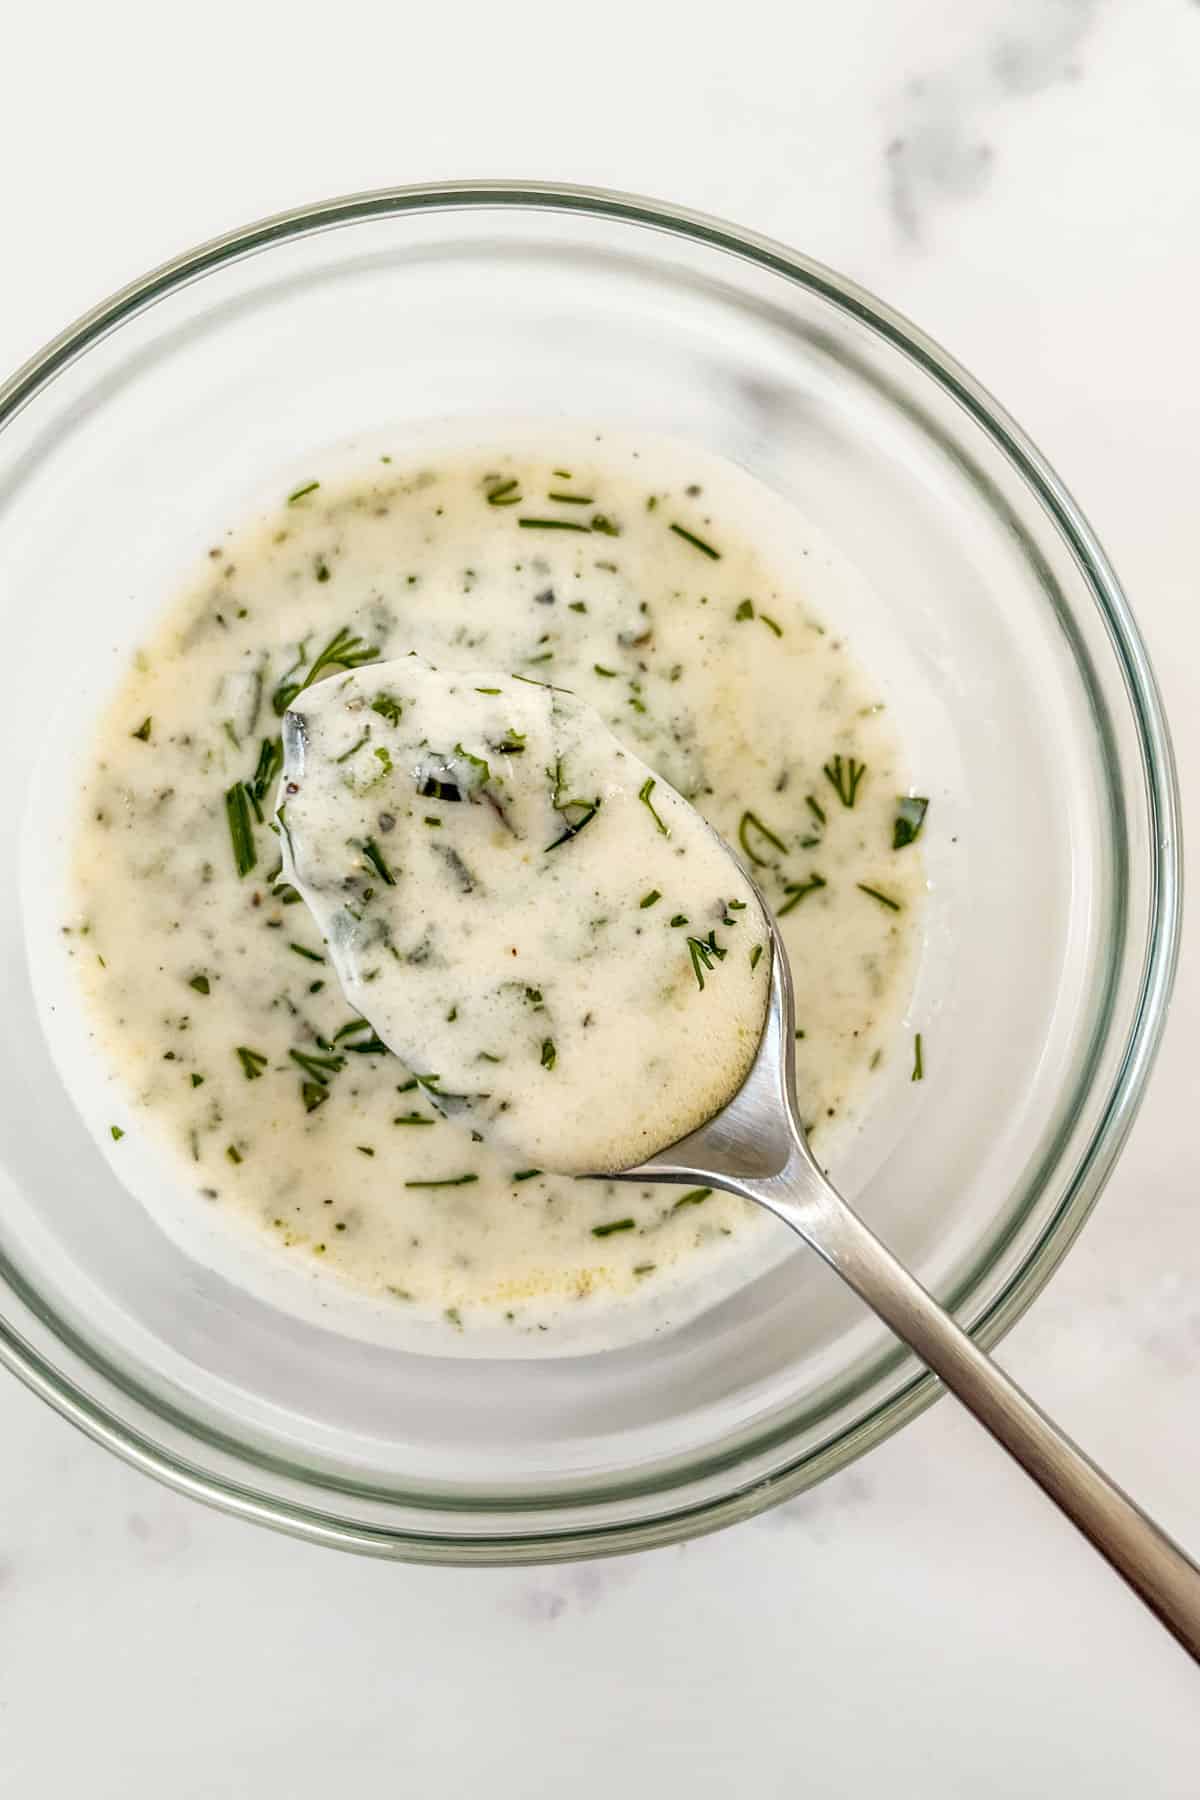 A spoon scooping up yogurt dill dressing from a glass bowl.